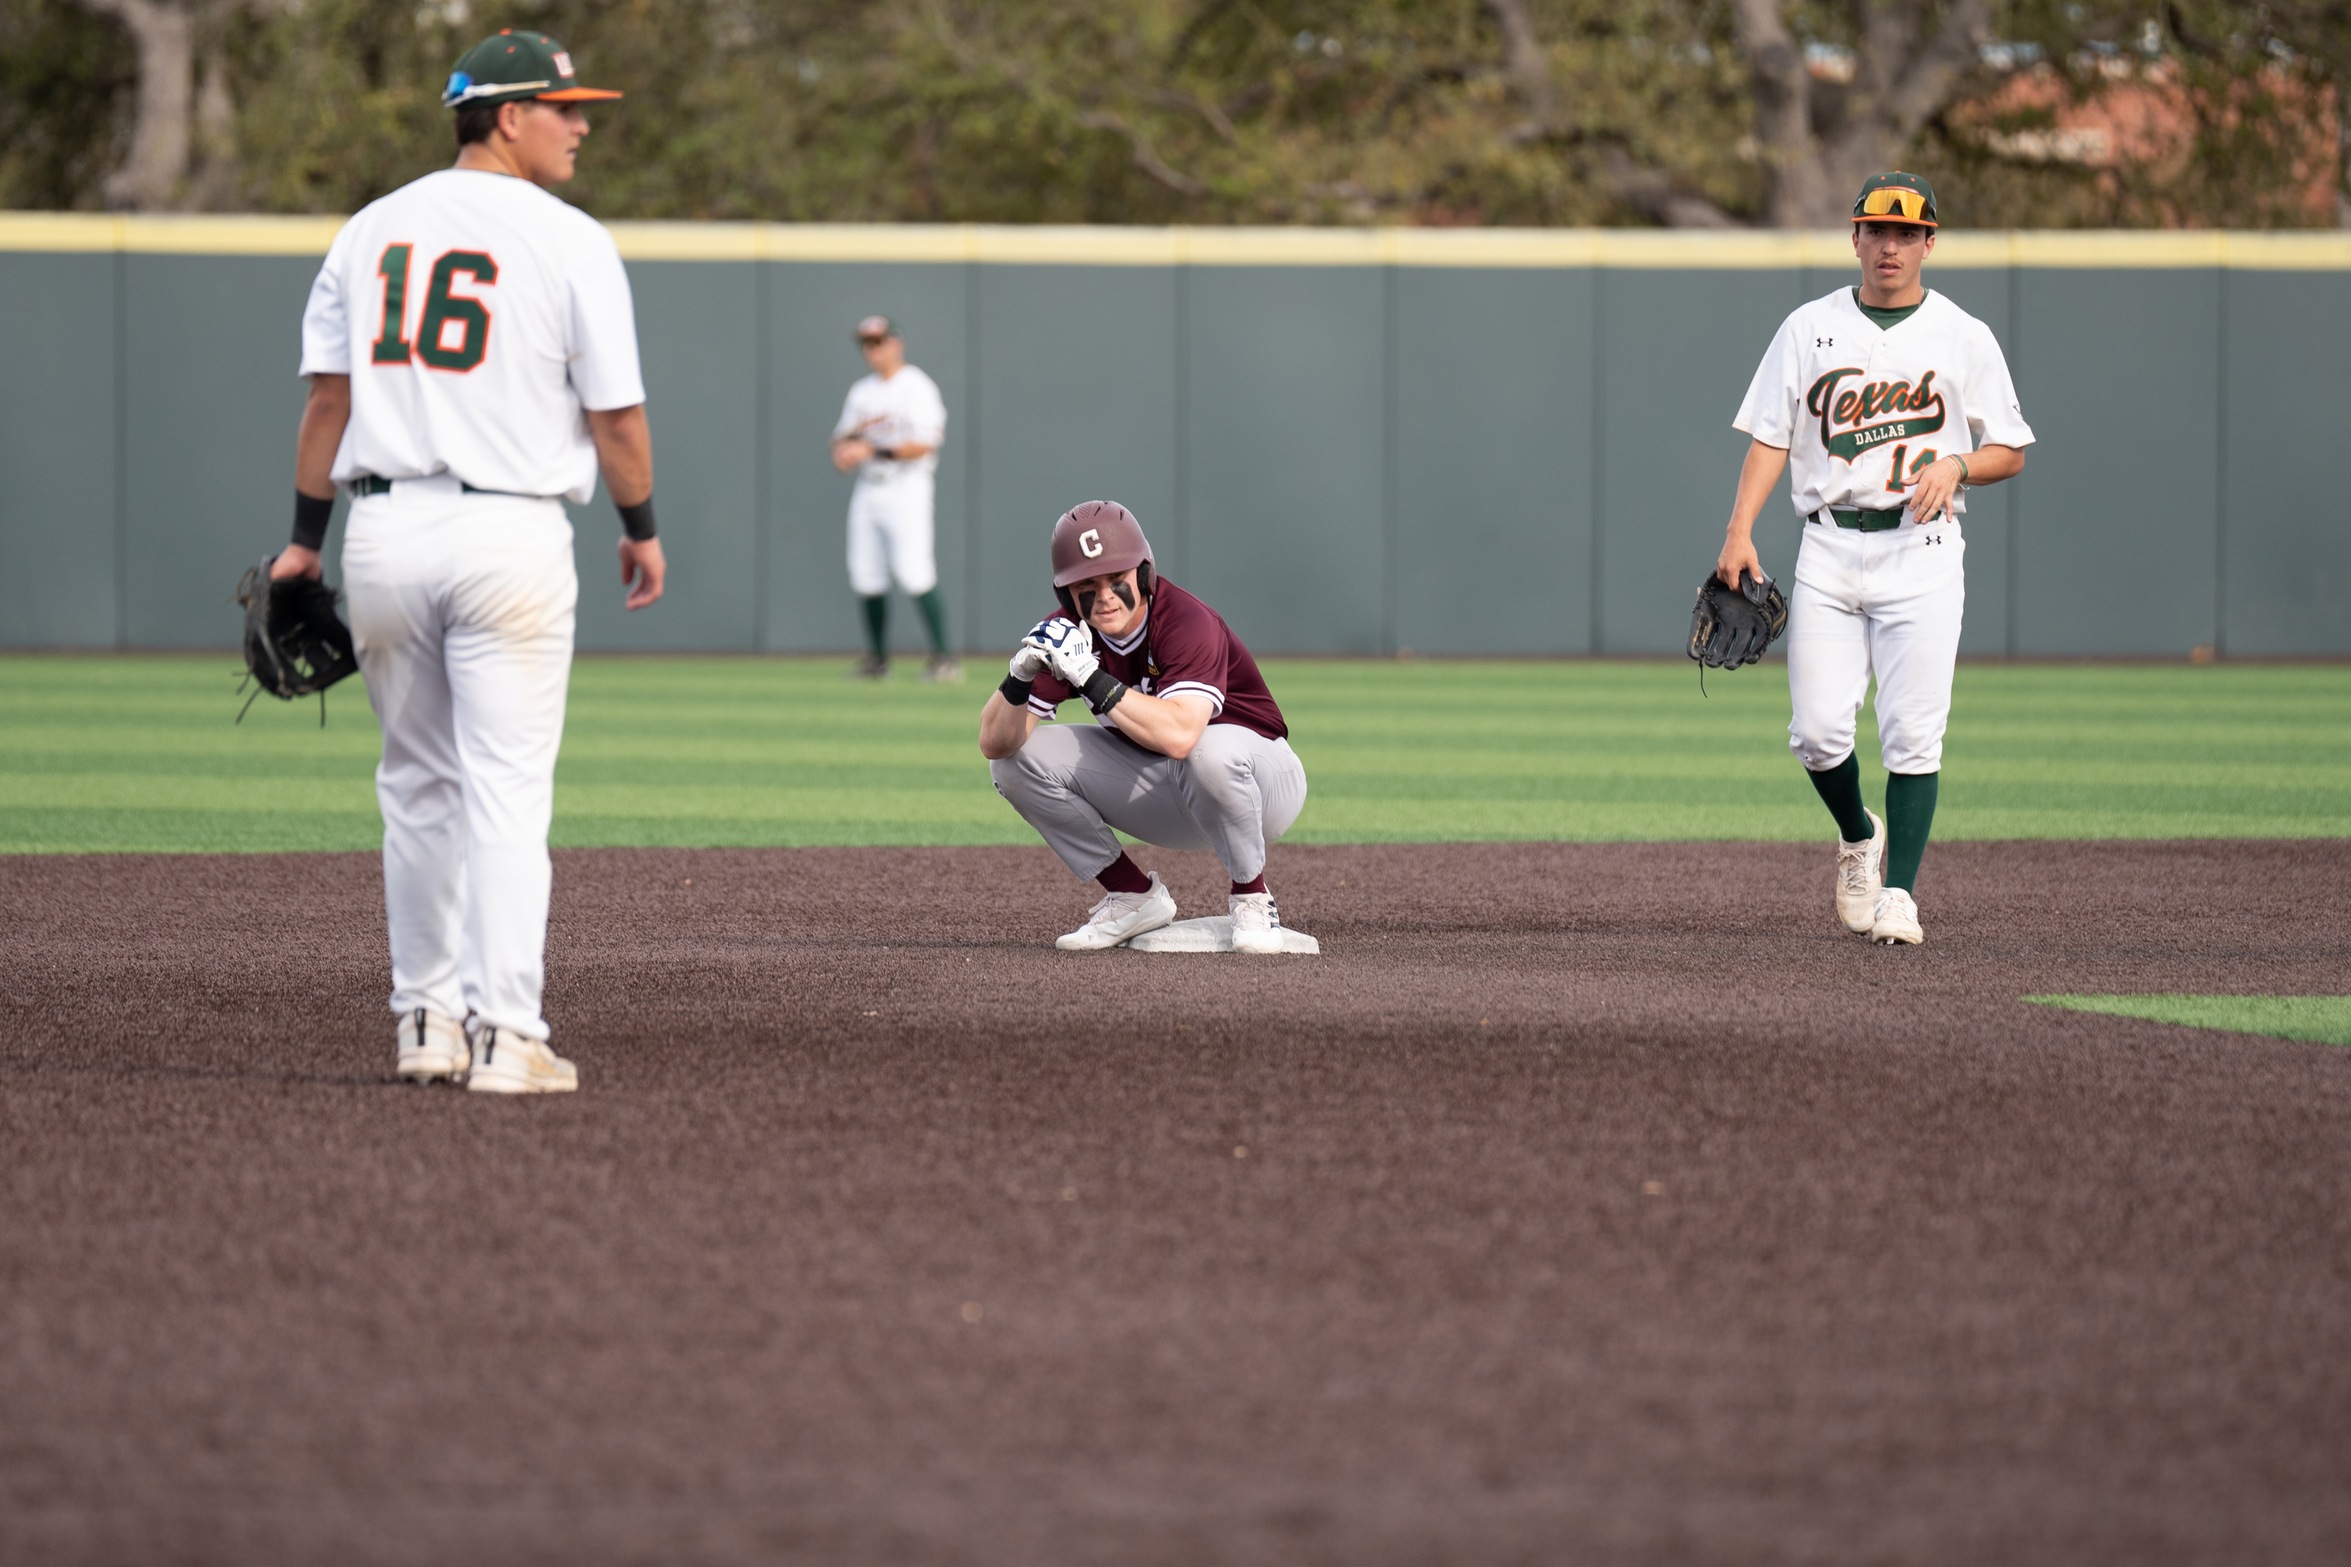 The Diamond Gents completed a series sweep over Southwestern on Saturday at home.